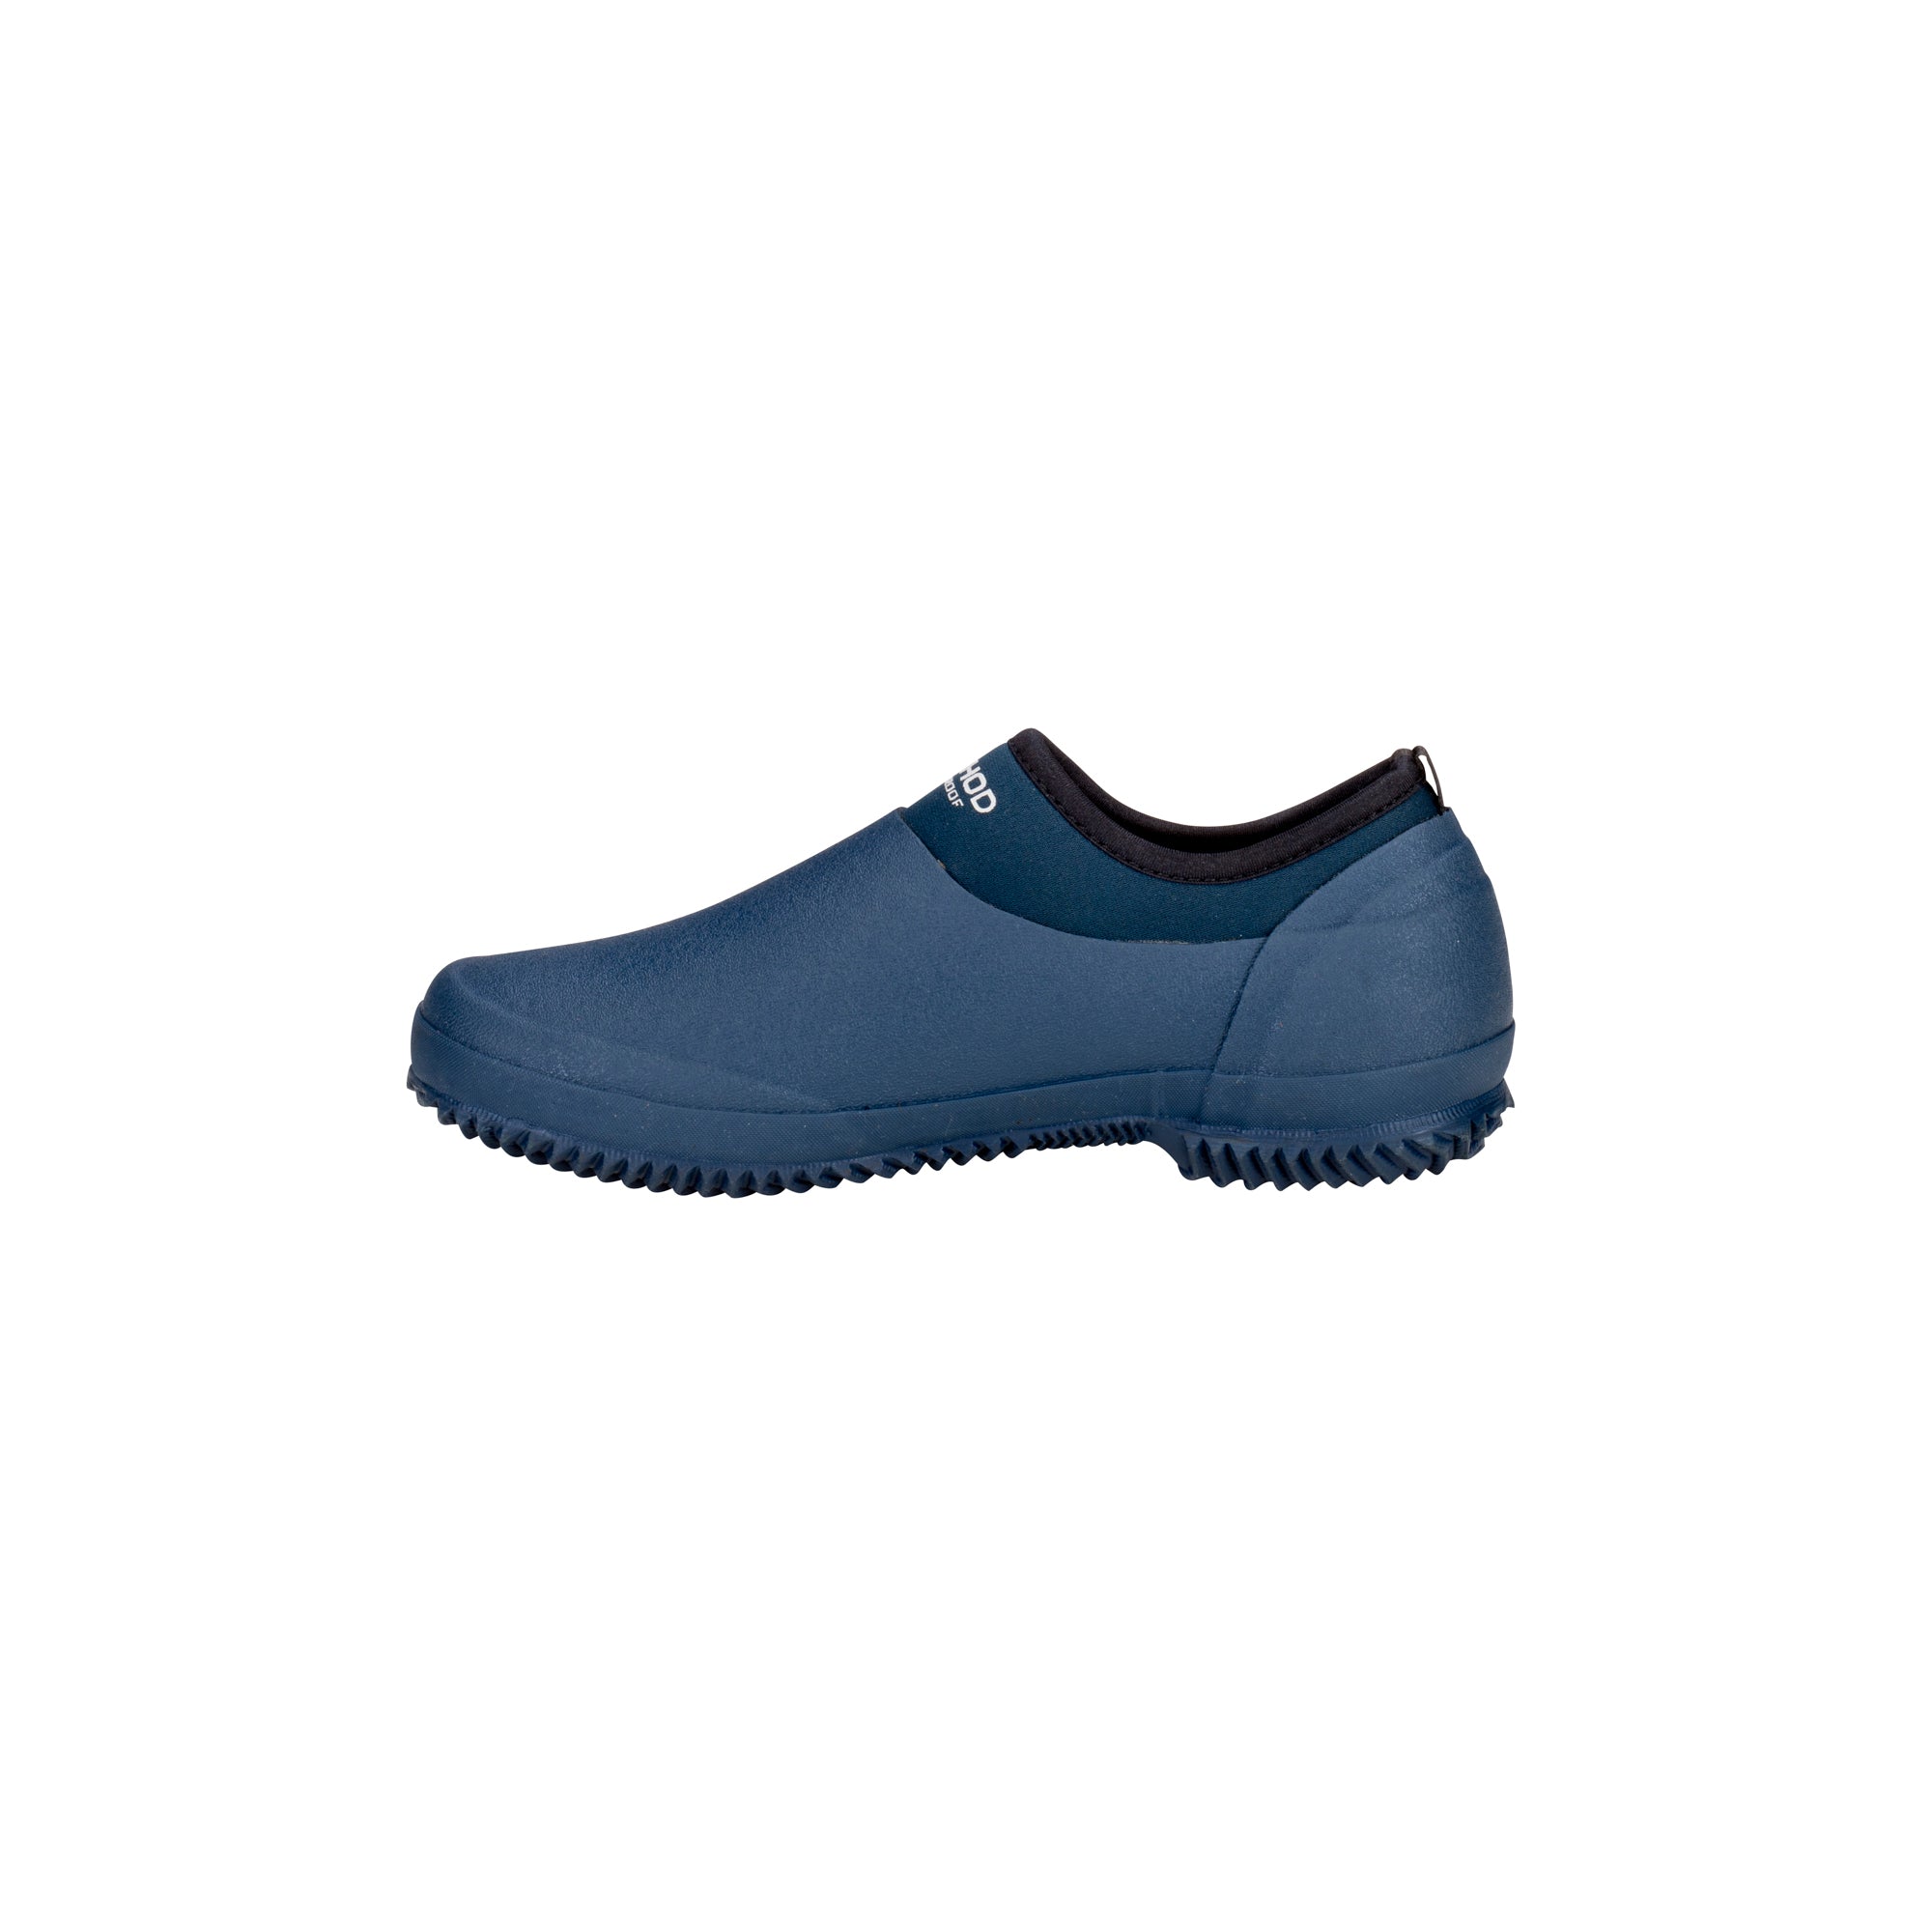 navy blue womens work shoes